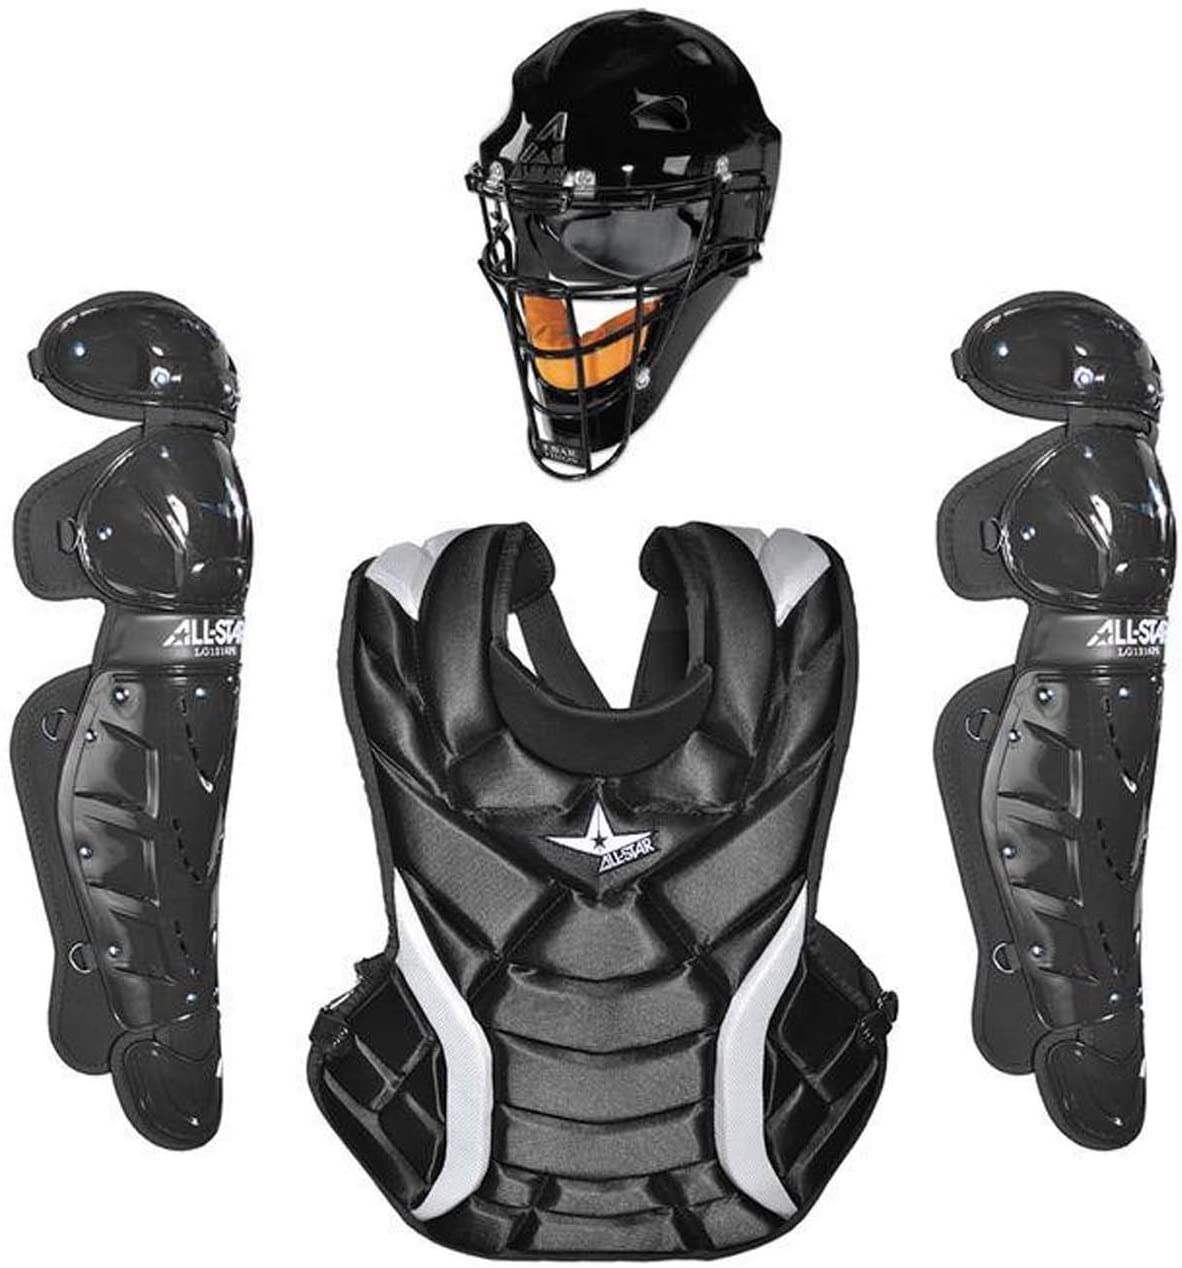 The Fastpitch Series Catcher's Set includes a catcher's mask, chest protector, leg guards, and equipment bag. The dual density foam liner, ABS plastic shell, and steel cage. Meets NOCSAE Standards. Designed for the intermediate softball catcher These double knee designed leg guards are great for beginners through intermediate softball catchers.